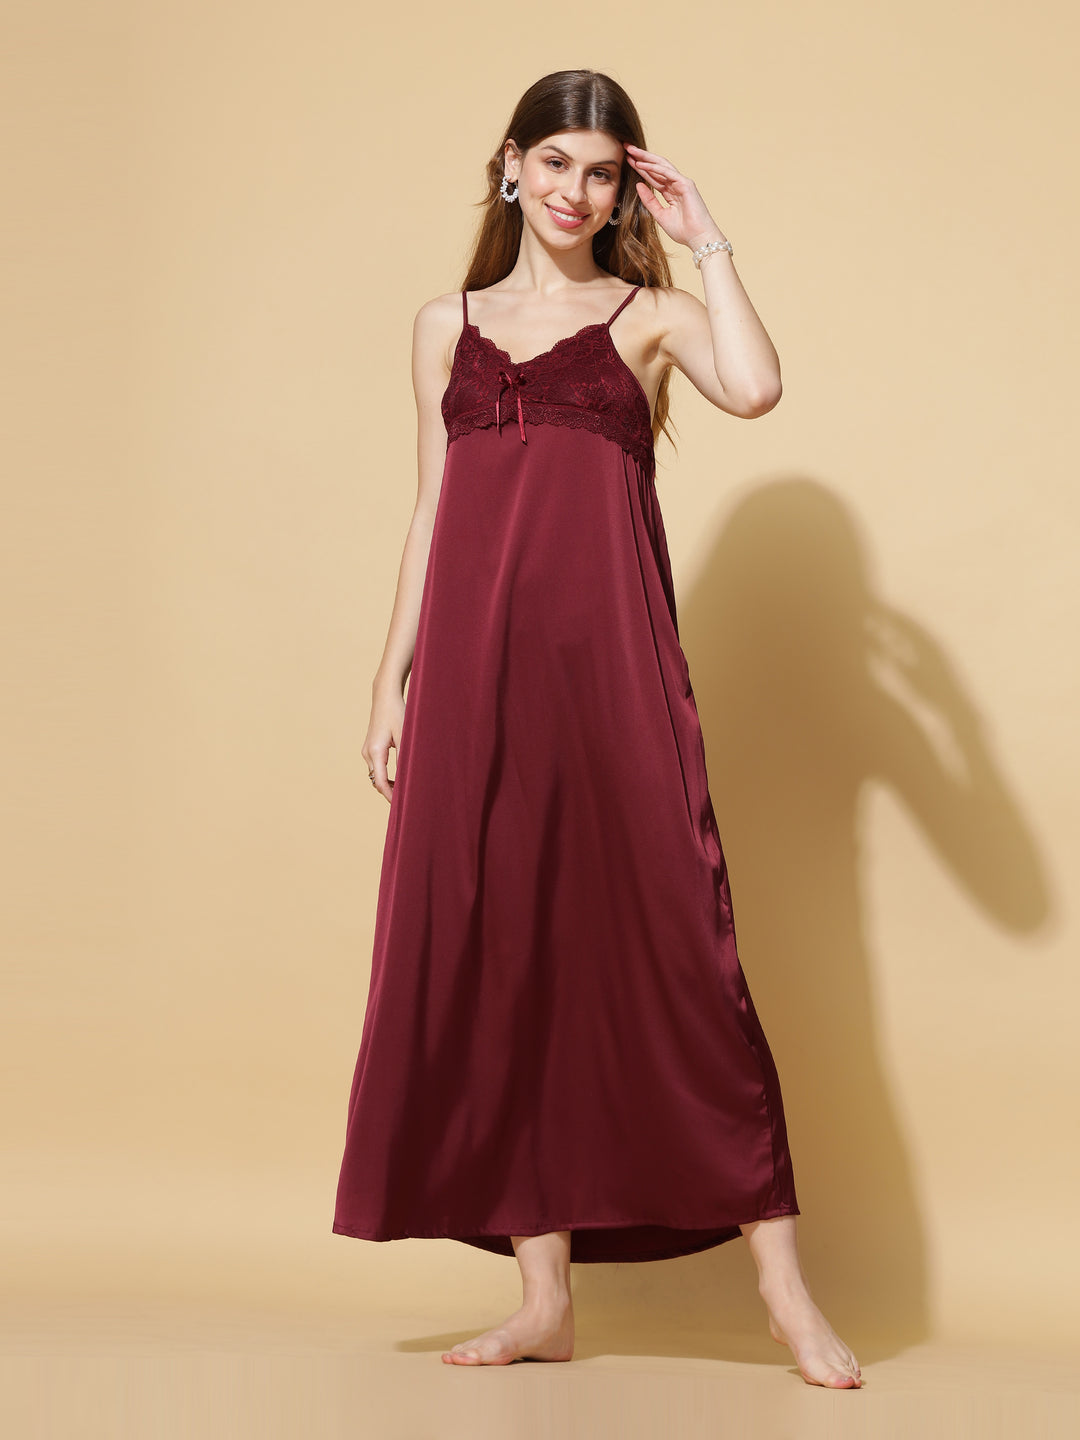 Hot Romantic Maroon Long Robe With Long Gown